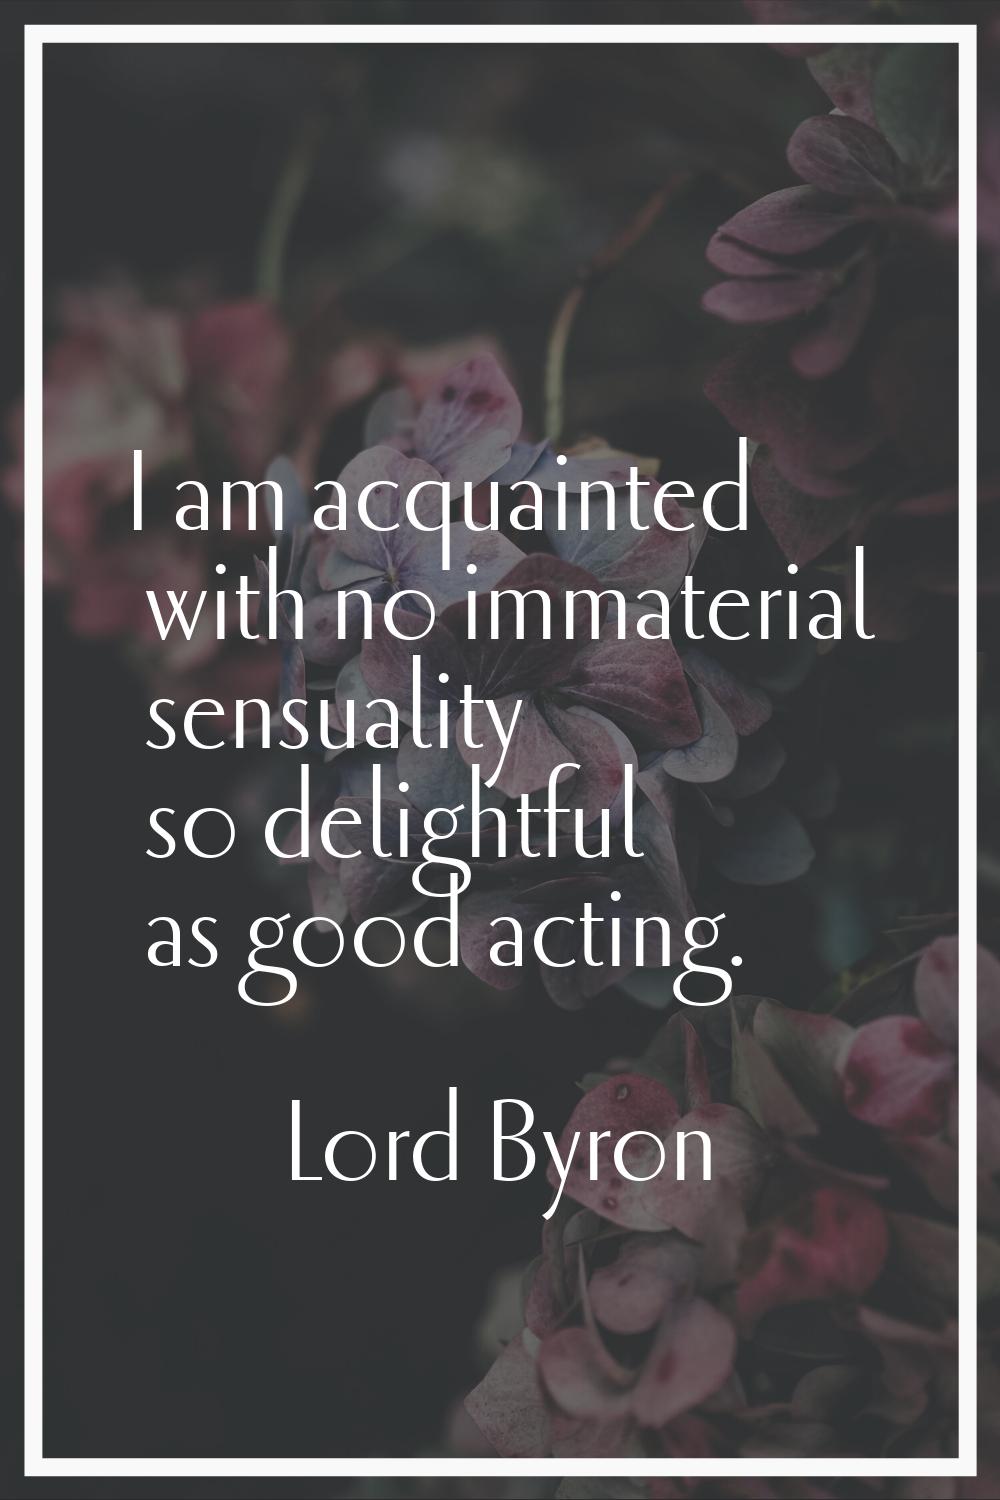 I am acquainted with no immaterial sensuality so delightful as good acting.